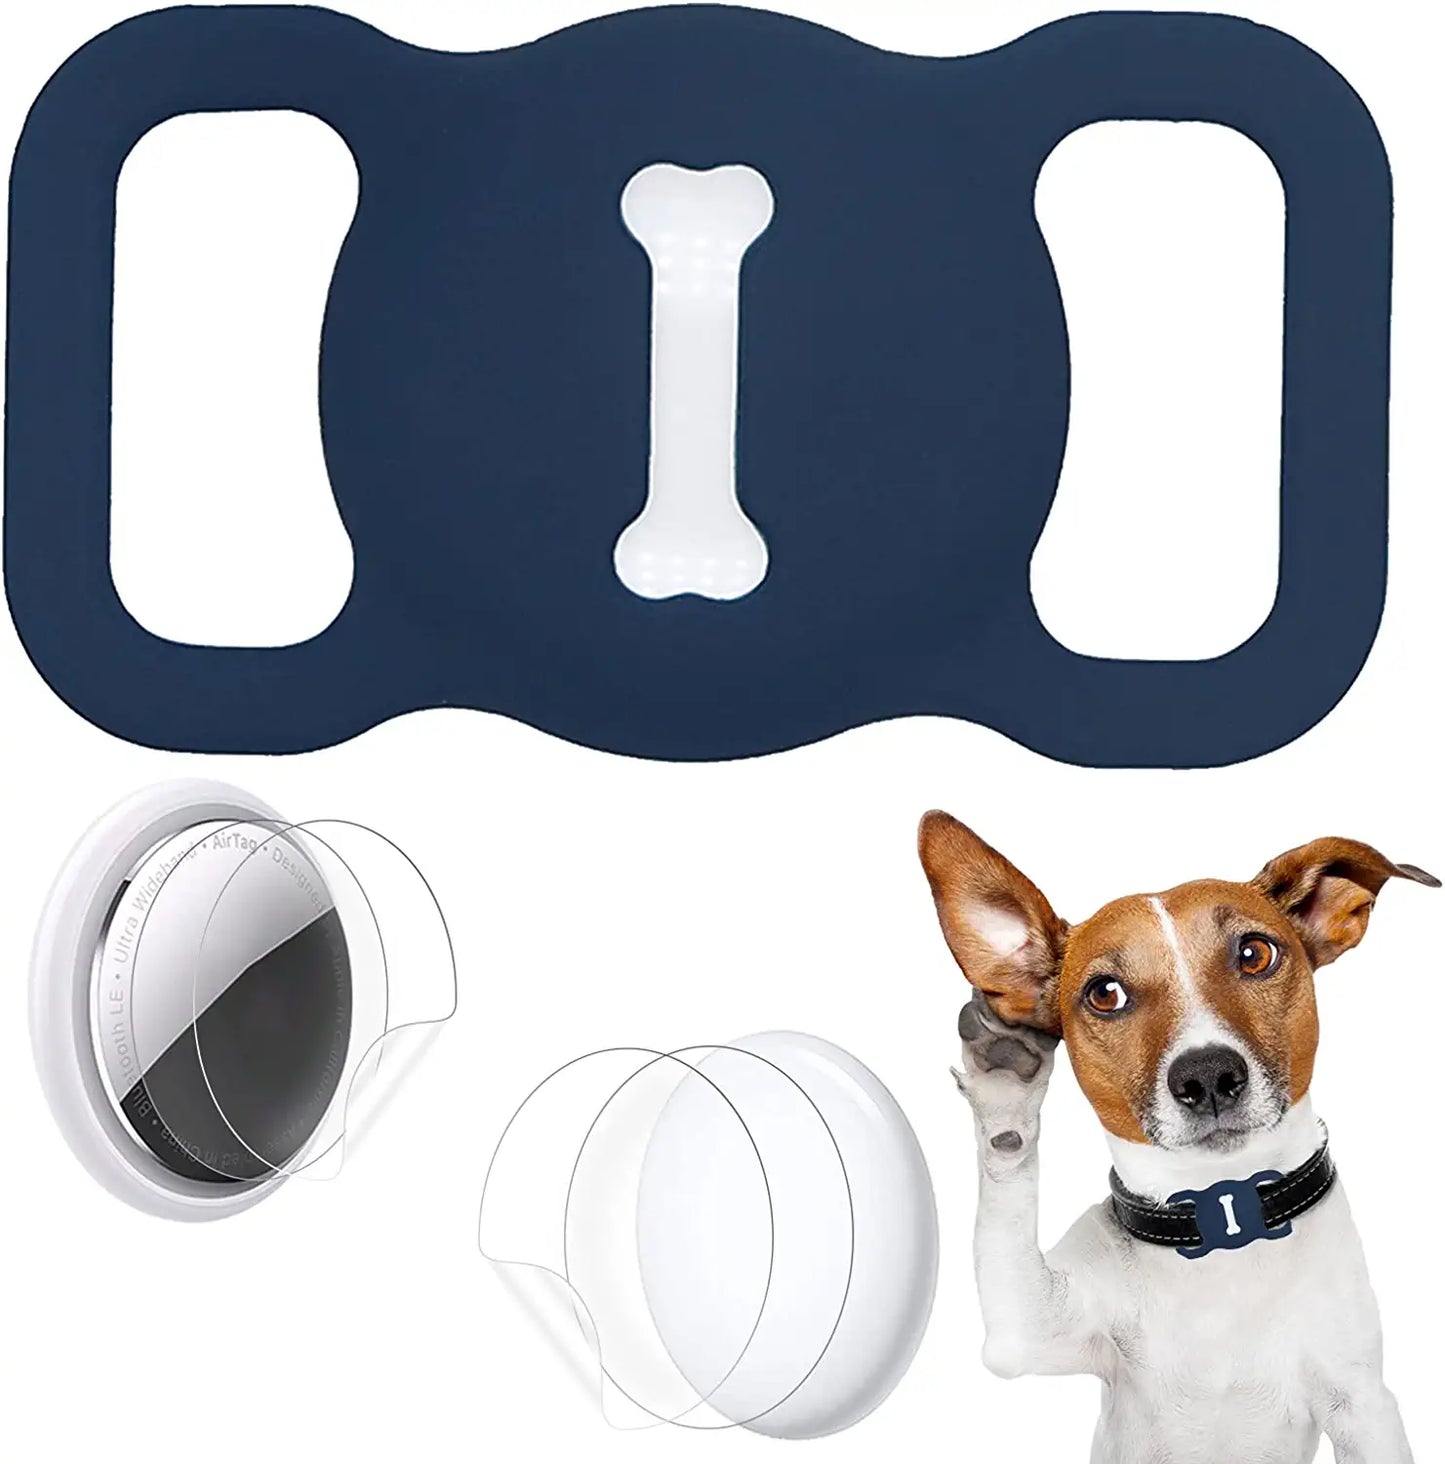 Protective Case Compatible for Apple Airtags for Dog Cat Collar Pet Loop Holder, Airtag Holder Accessories with Screen Protectors, Air Tag Silicone Cover for Pet Collar Electronics > GPS Accessories > GPS Cases Wustentre Dark Blue  